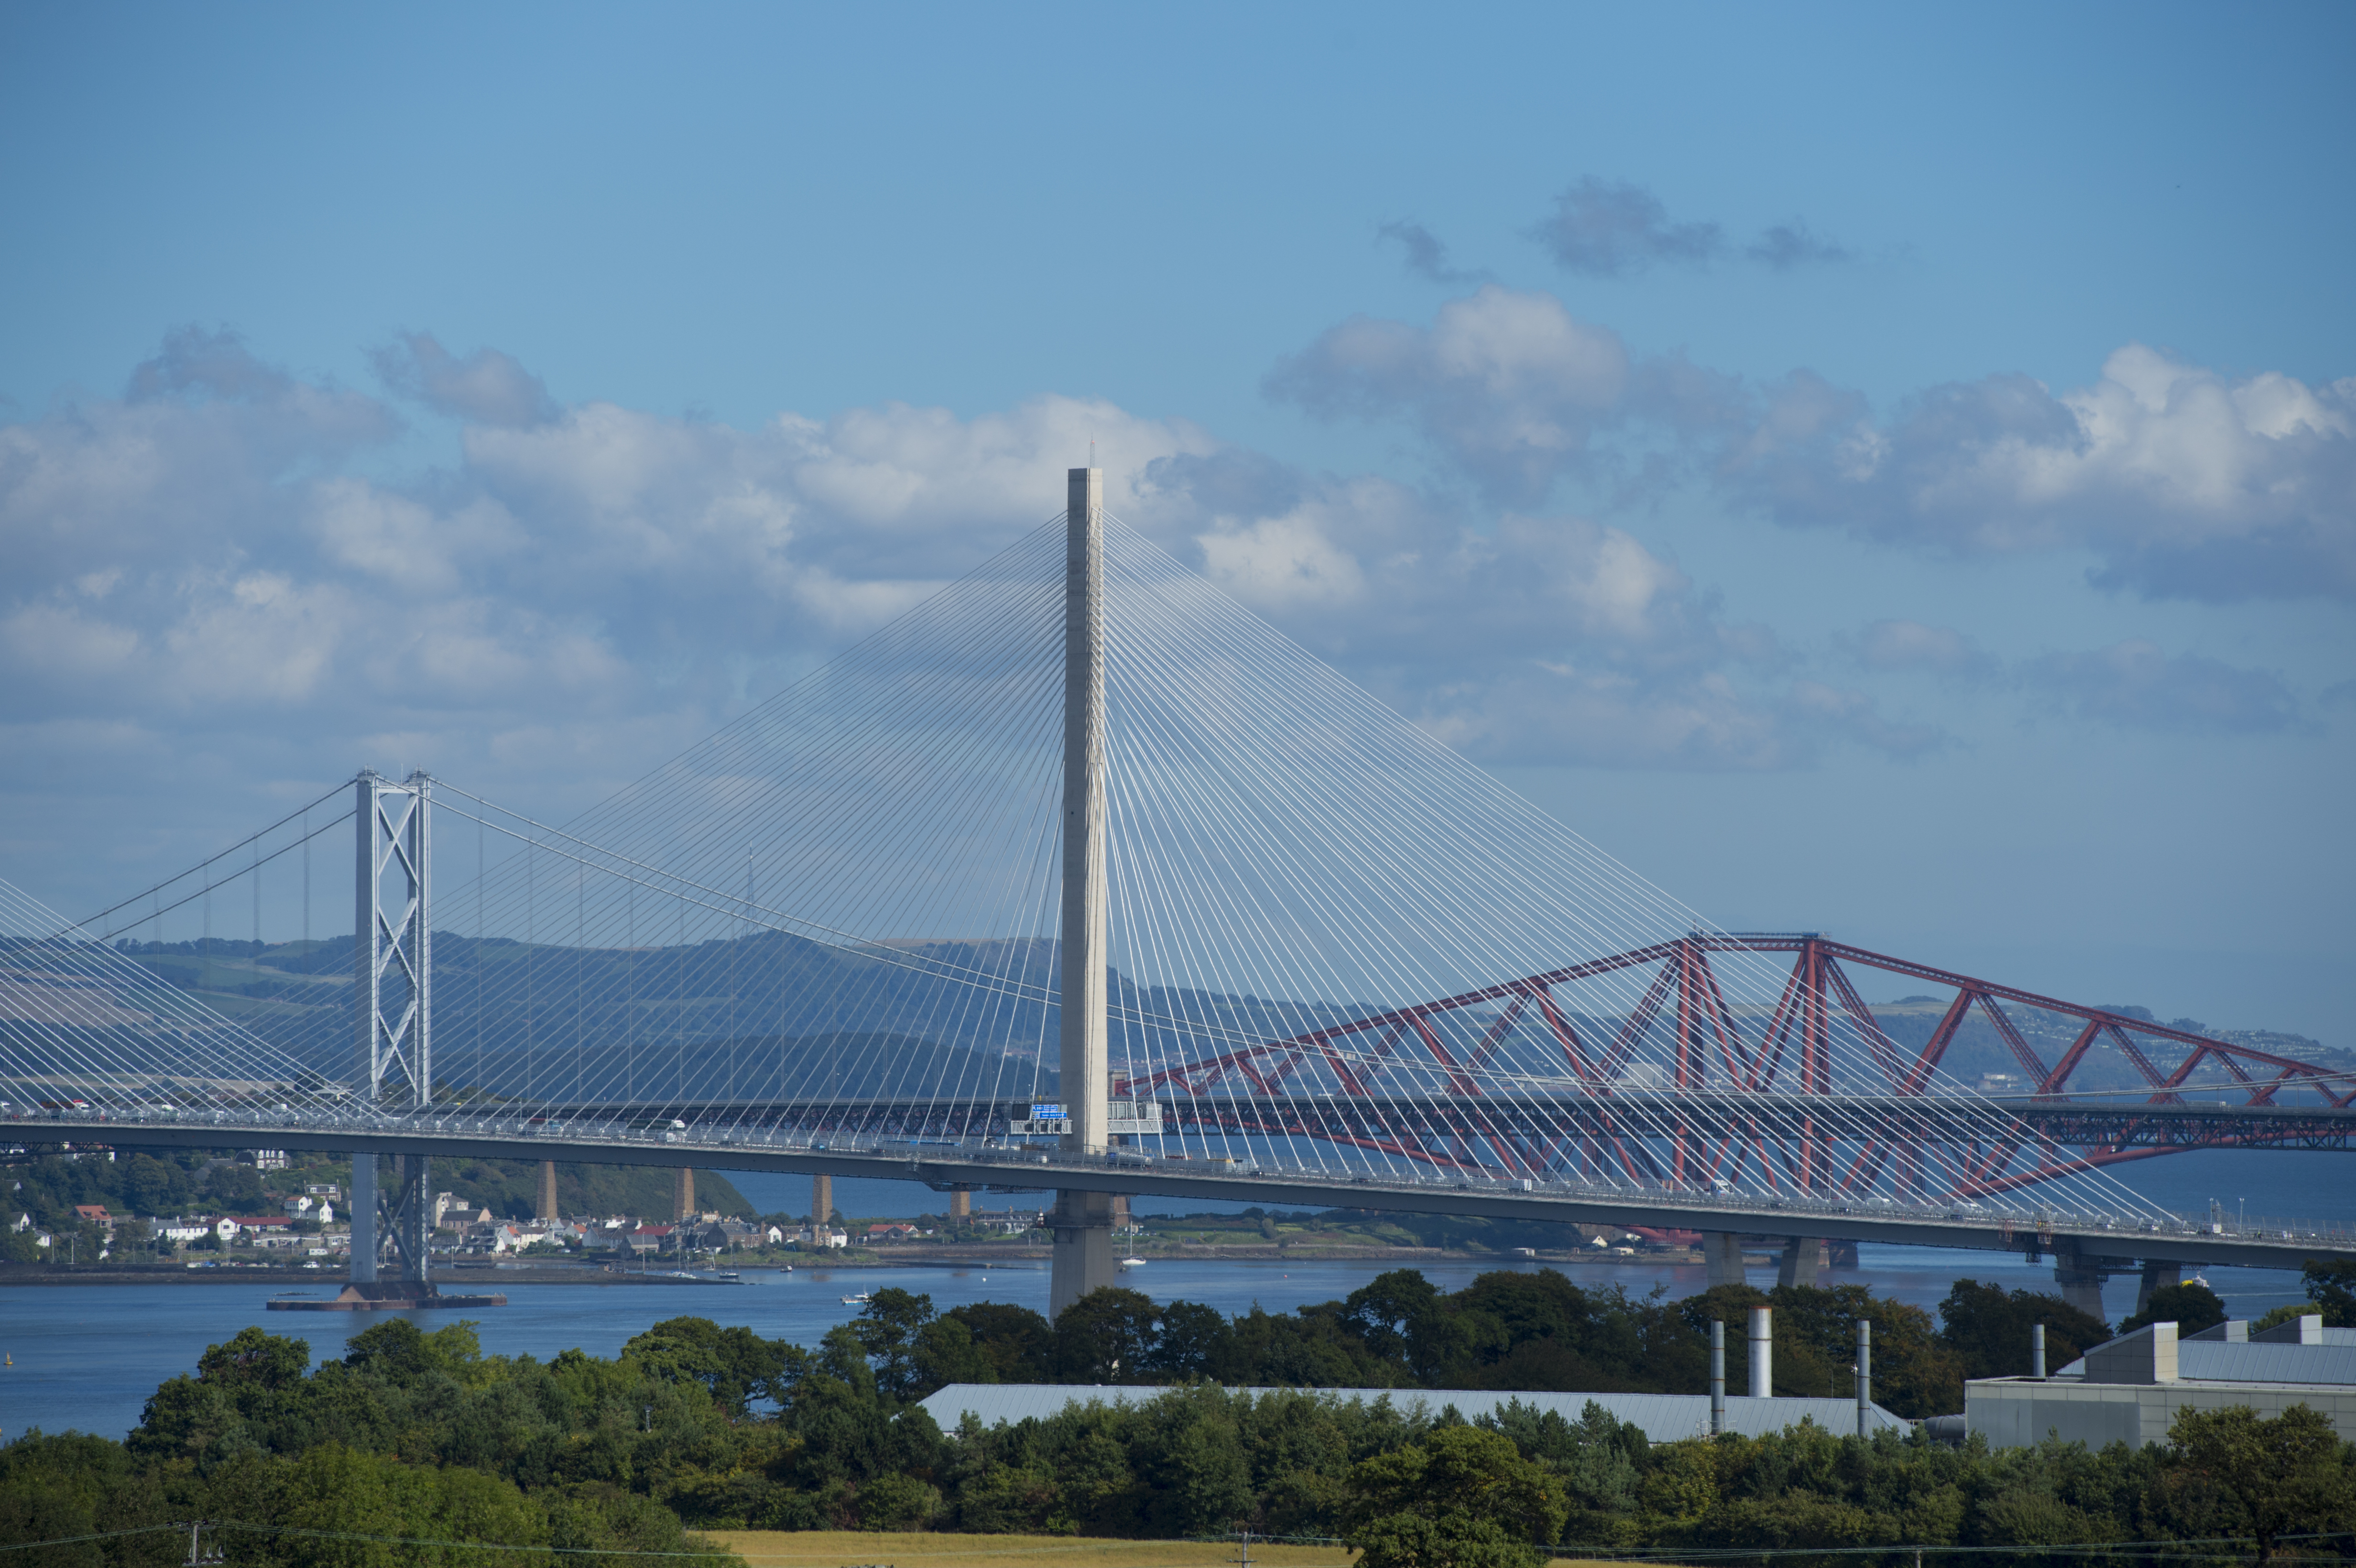 The new Queensferry Crossing